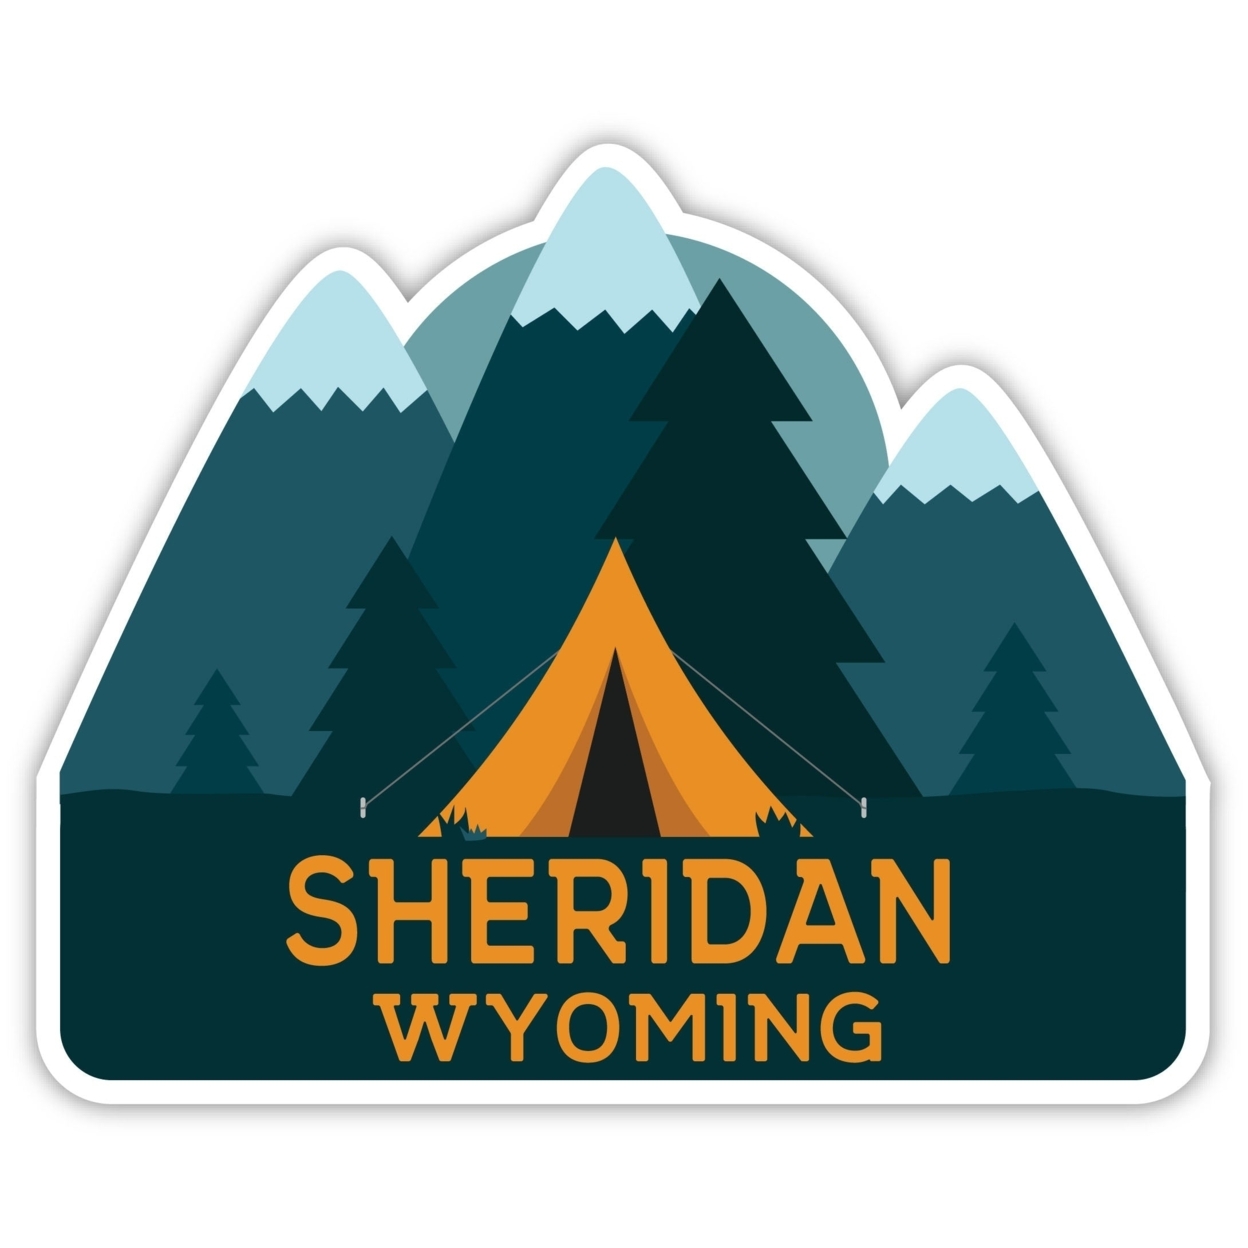 Sheridan Wyoming Souvenir Decorative Stickers (Choose Theme And Size) - Single Unit, 2-Inch, Camp Life